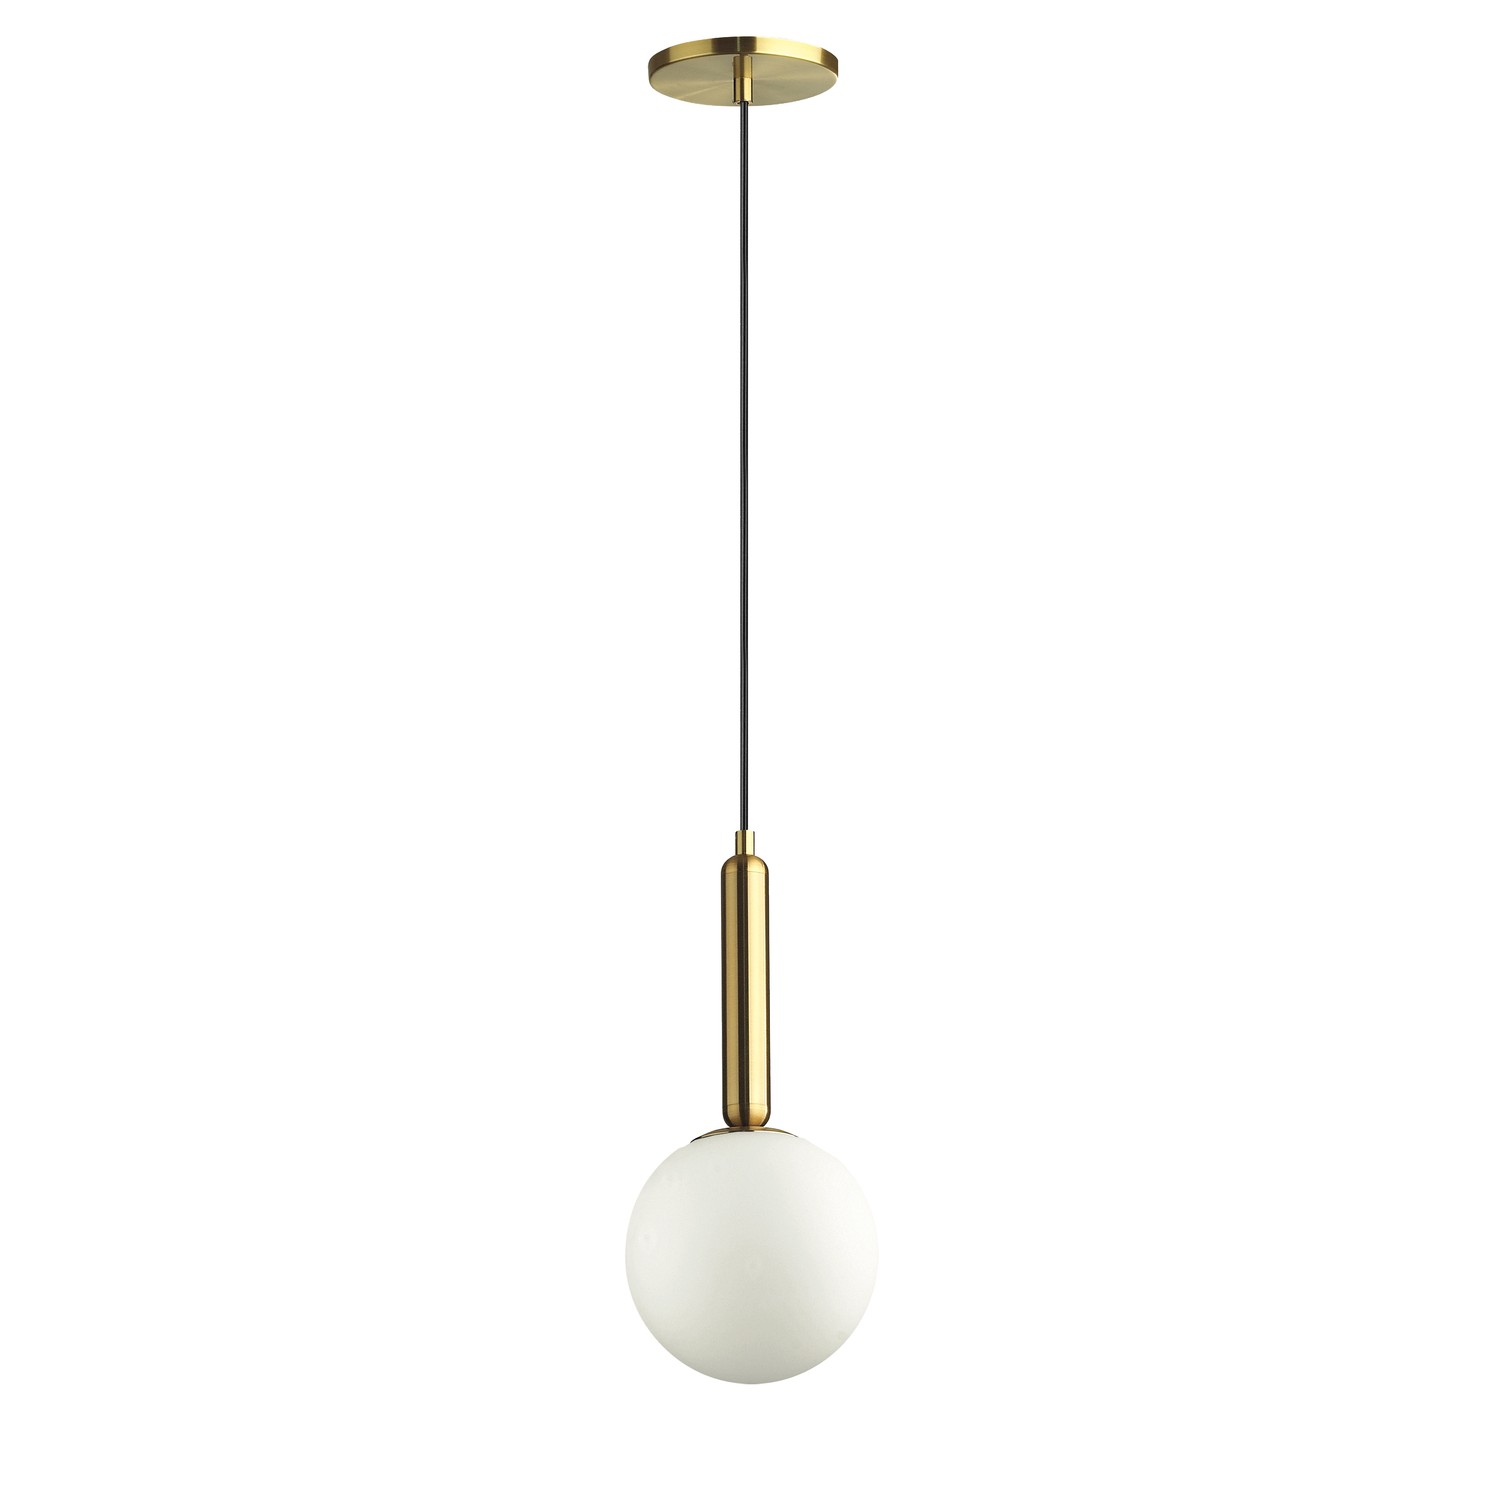 1 Light Incandescent Pendant, Aged Brass with White Glass